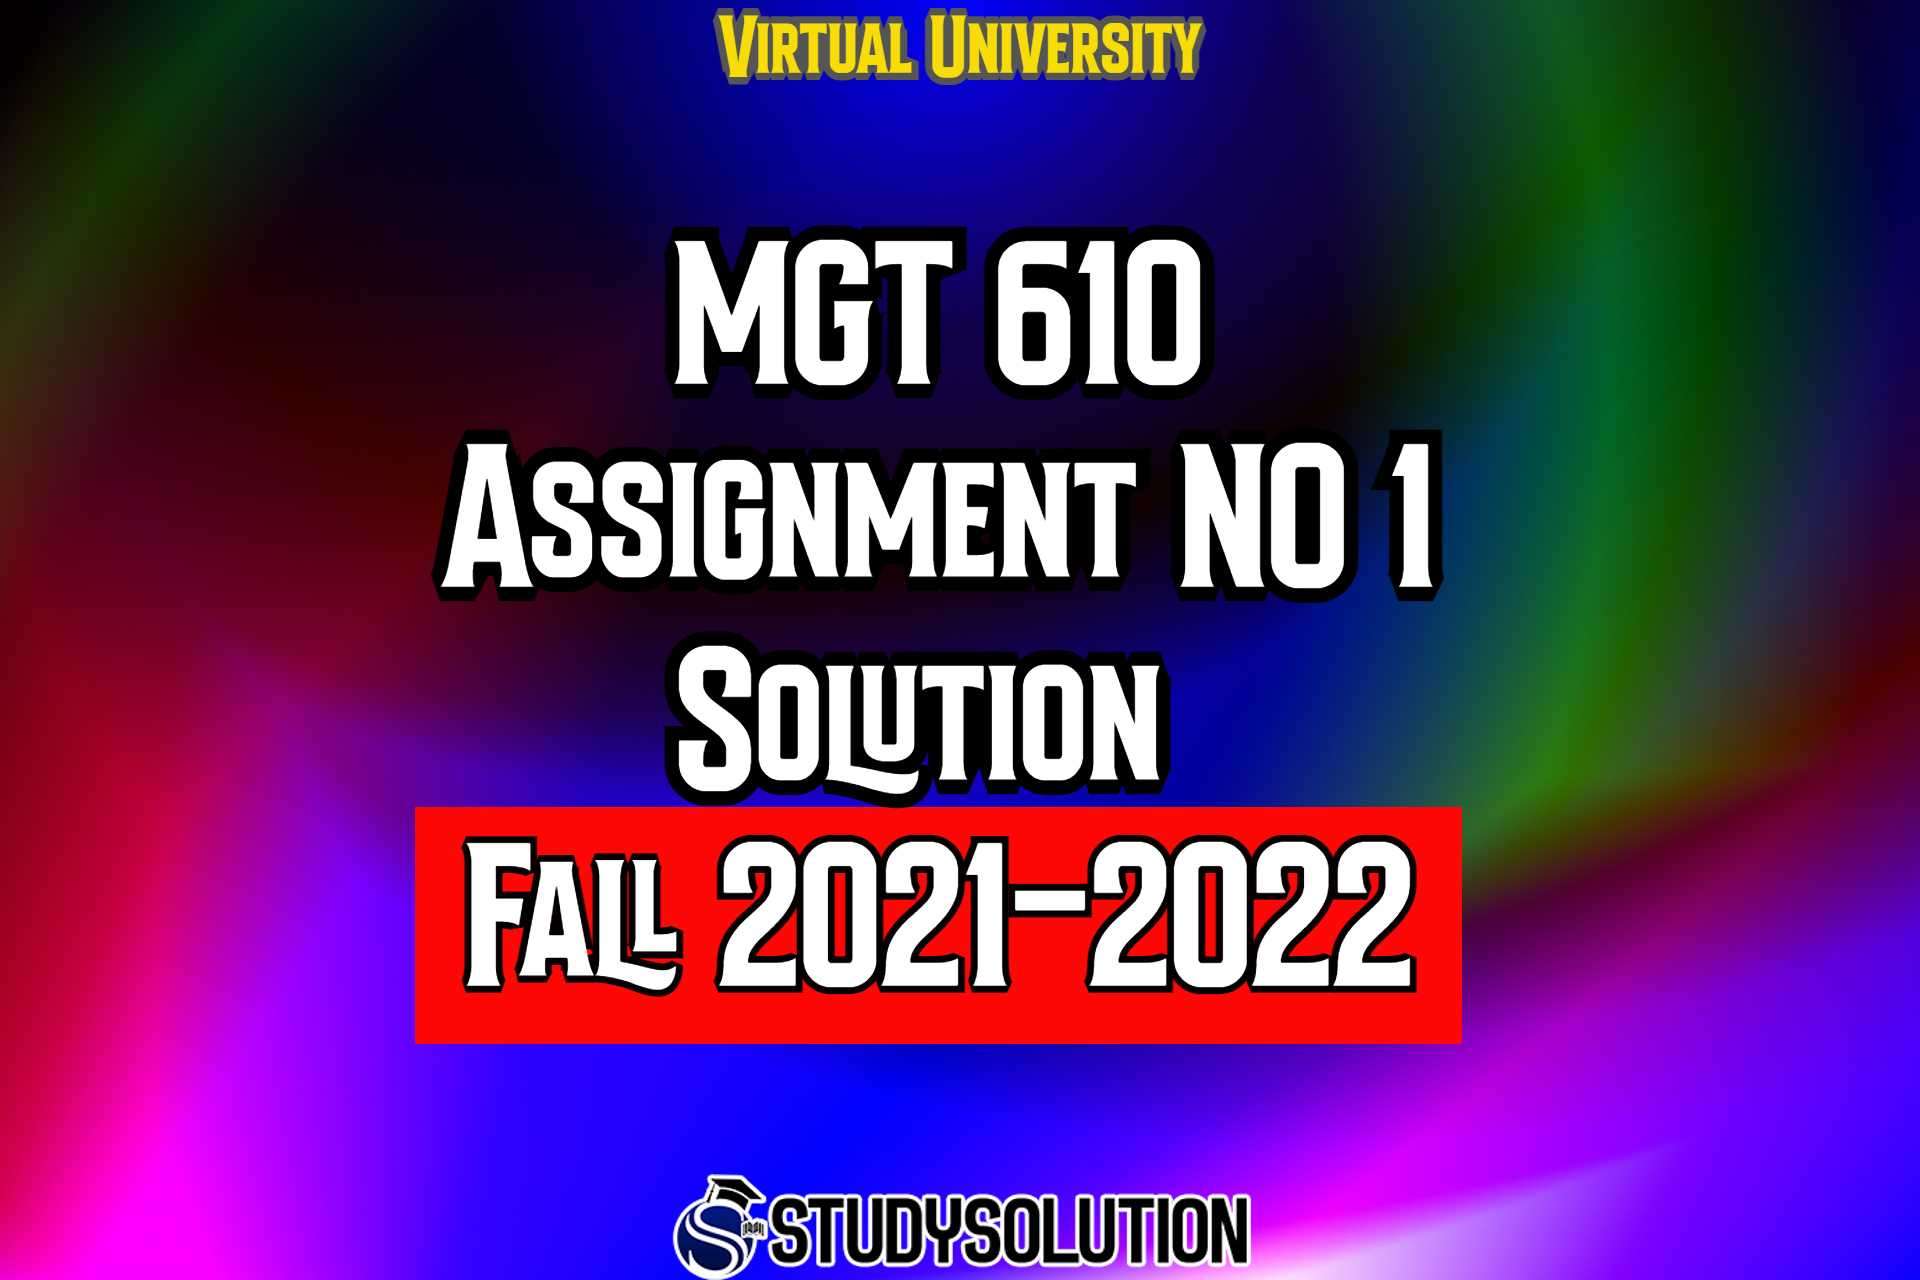 MGT610 Assignment No 1 Solution Fall 2022